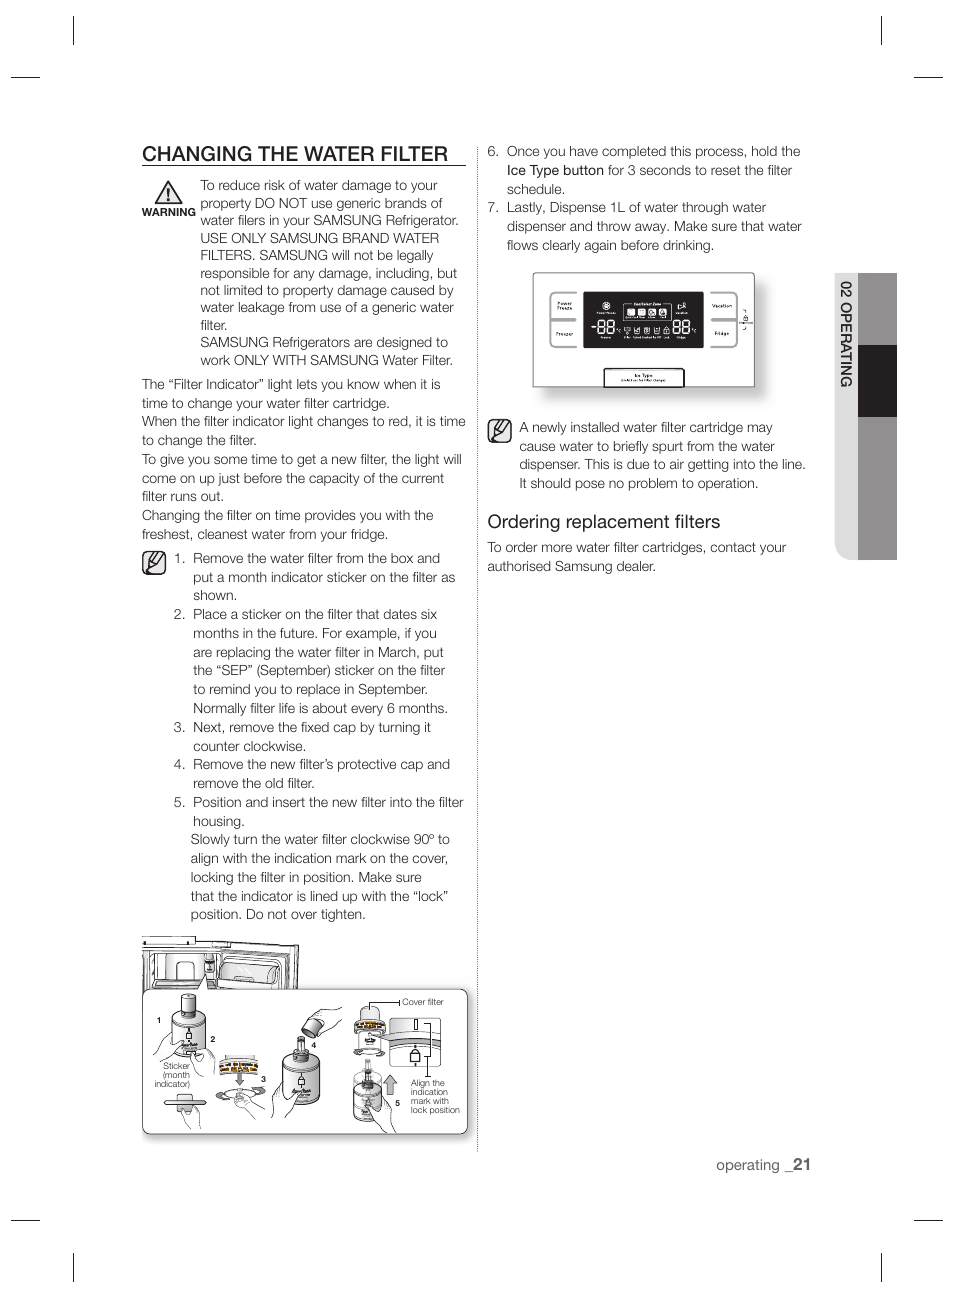 Changing the water filter, Ordering replacement ﬁ lters | Samsung RSH7PNPN  User Manual | Page 21 / 216 | Original mode